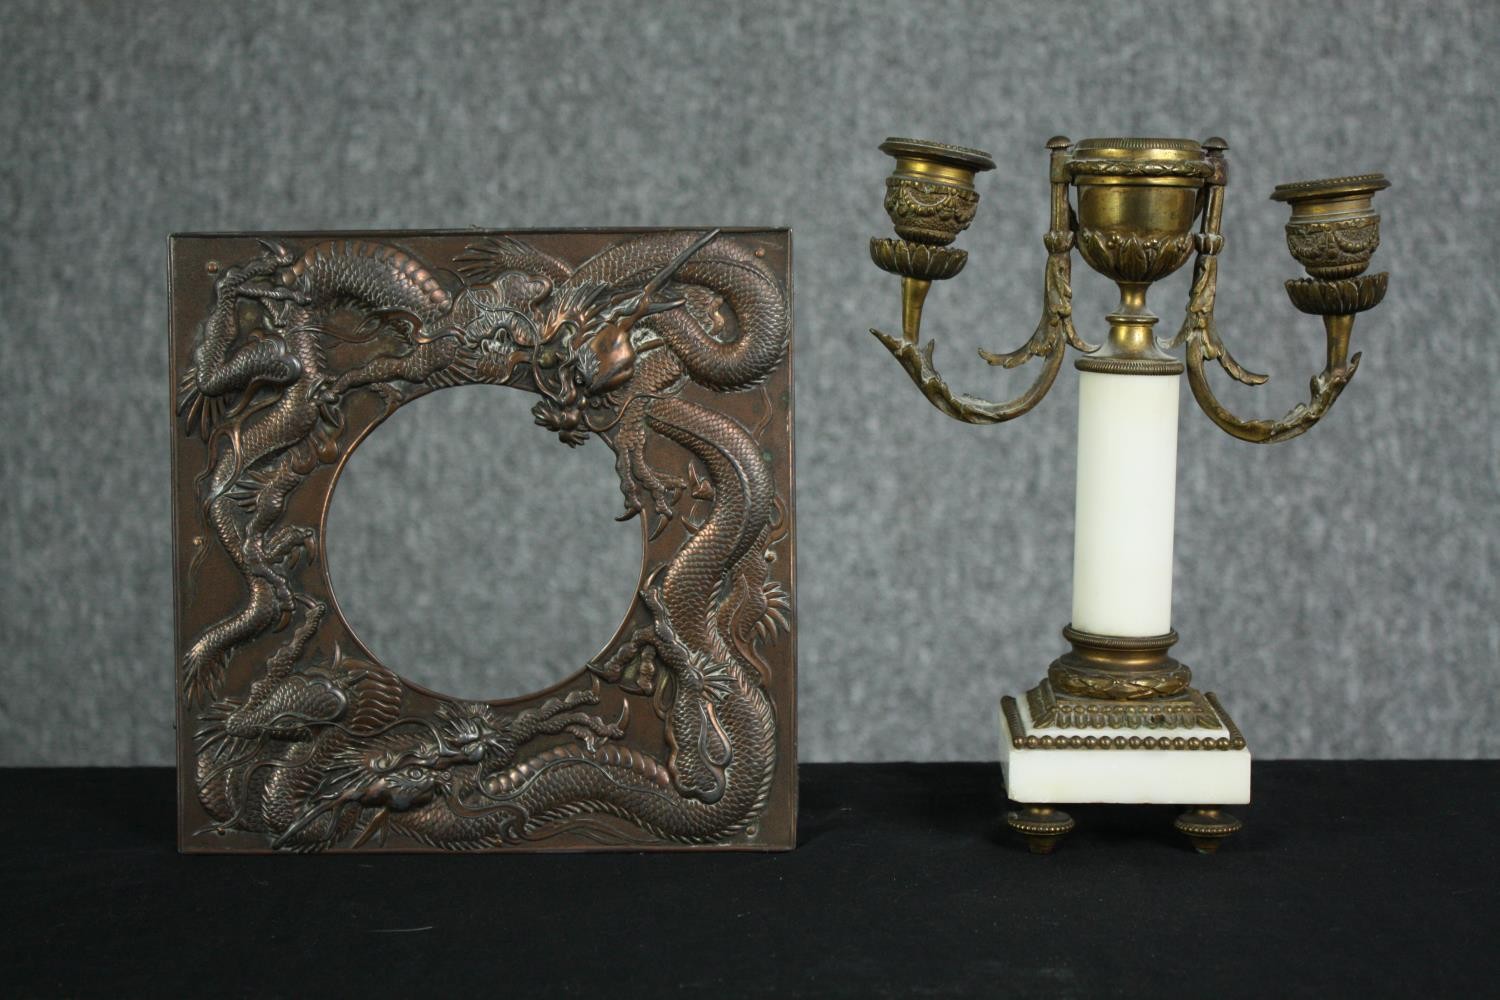 A small 19th century gilt metal and marble candelabra along with metal frame decorated with